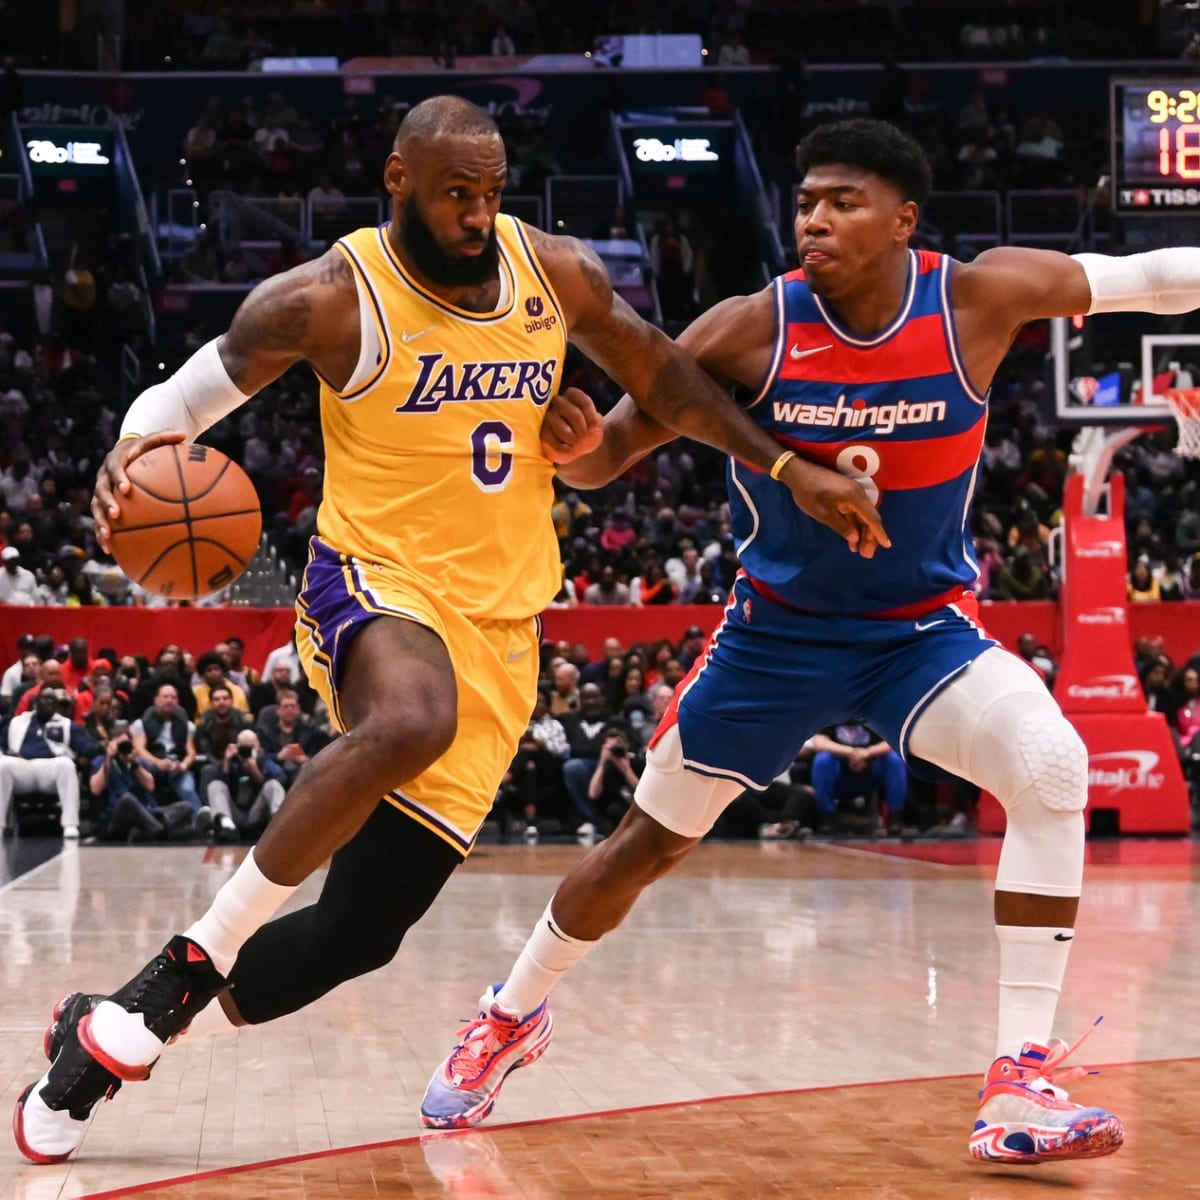 Lakers Forward Rui Hachimura Trained with LeBron James, Had 'Extremely High  Level of Confidence' ahead of NBA Season Opener Next Month, GM Says, as LA  Head Coach Also Praises Japan Star 